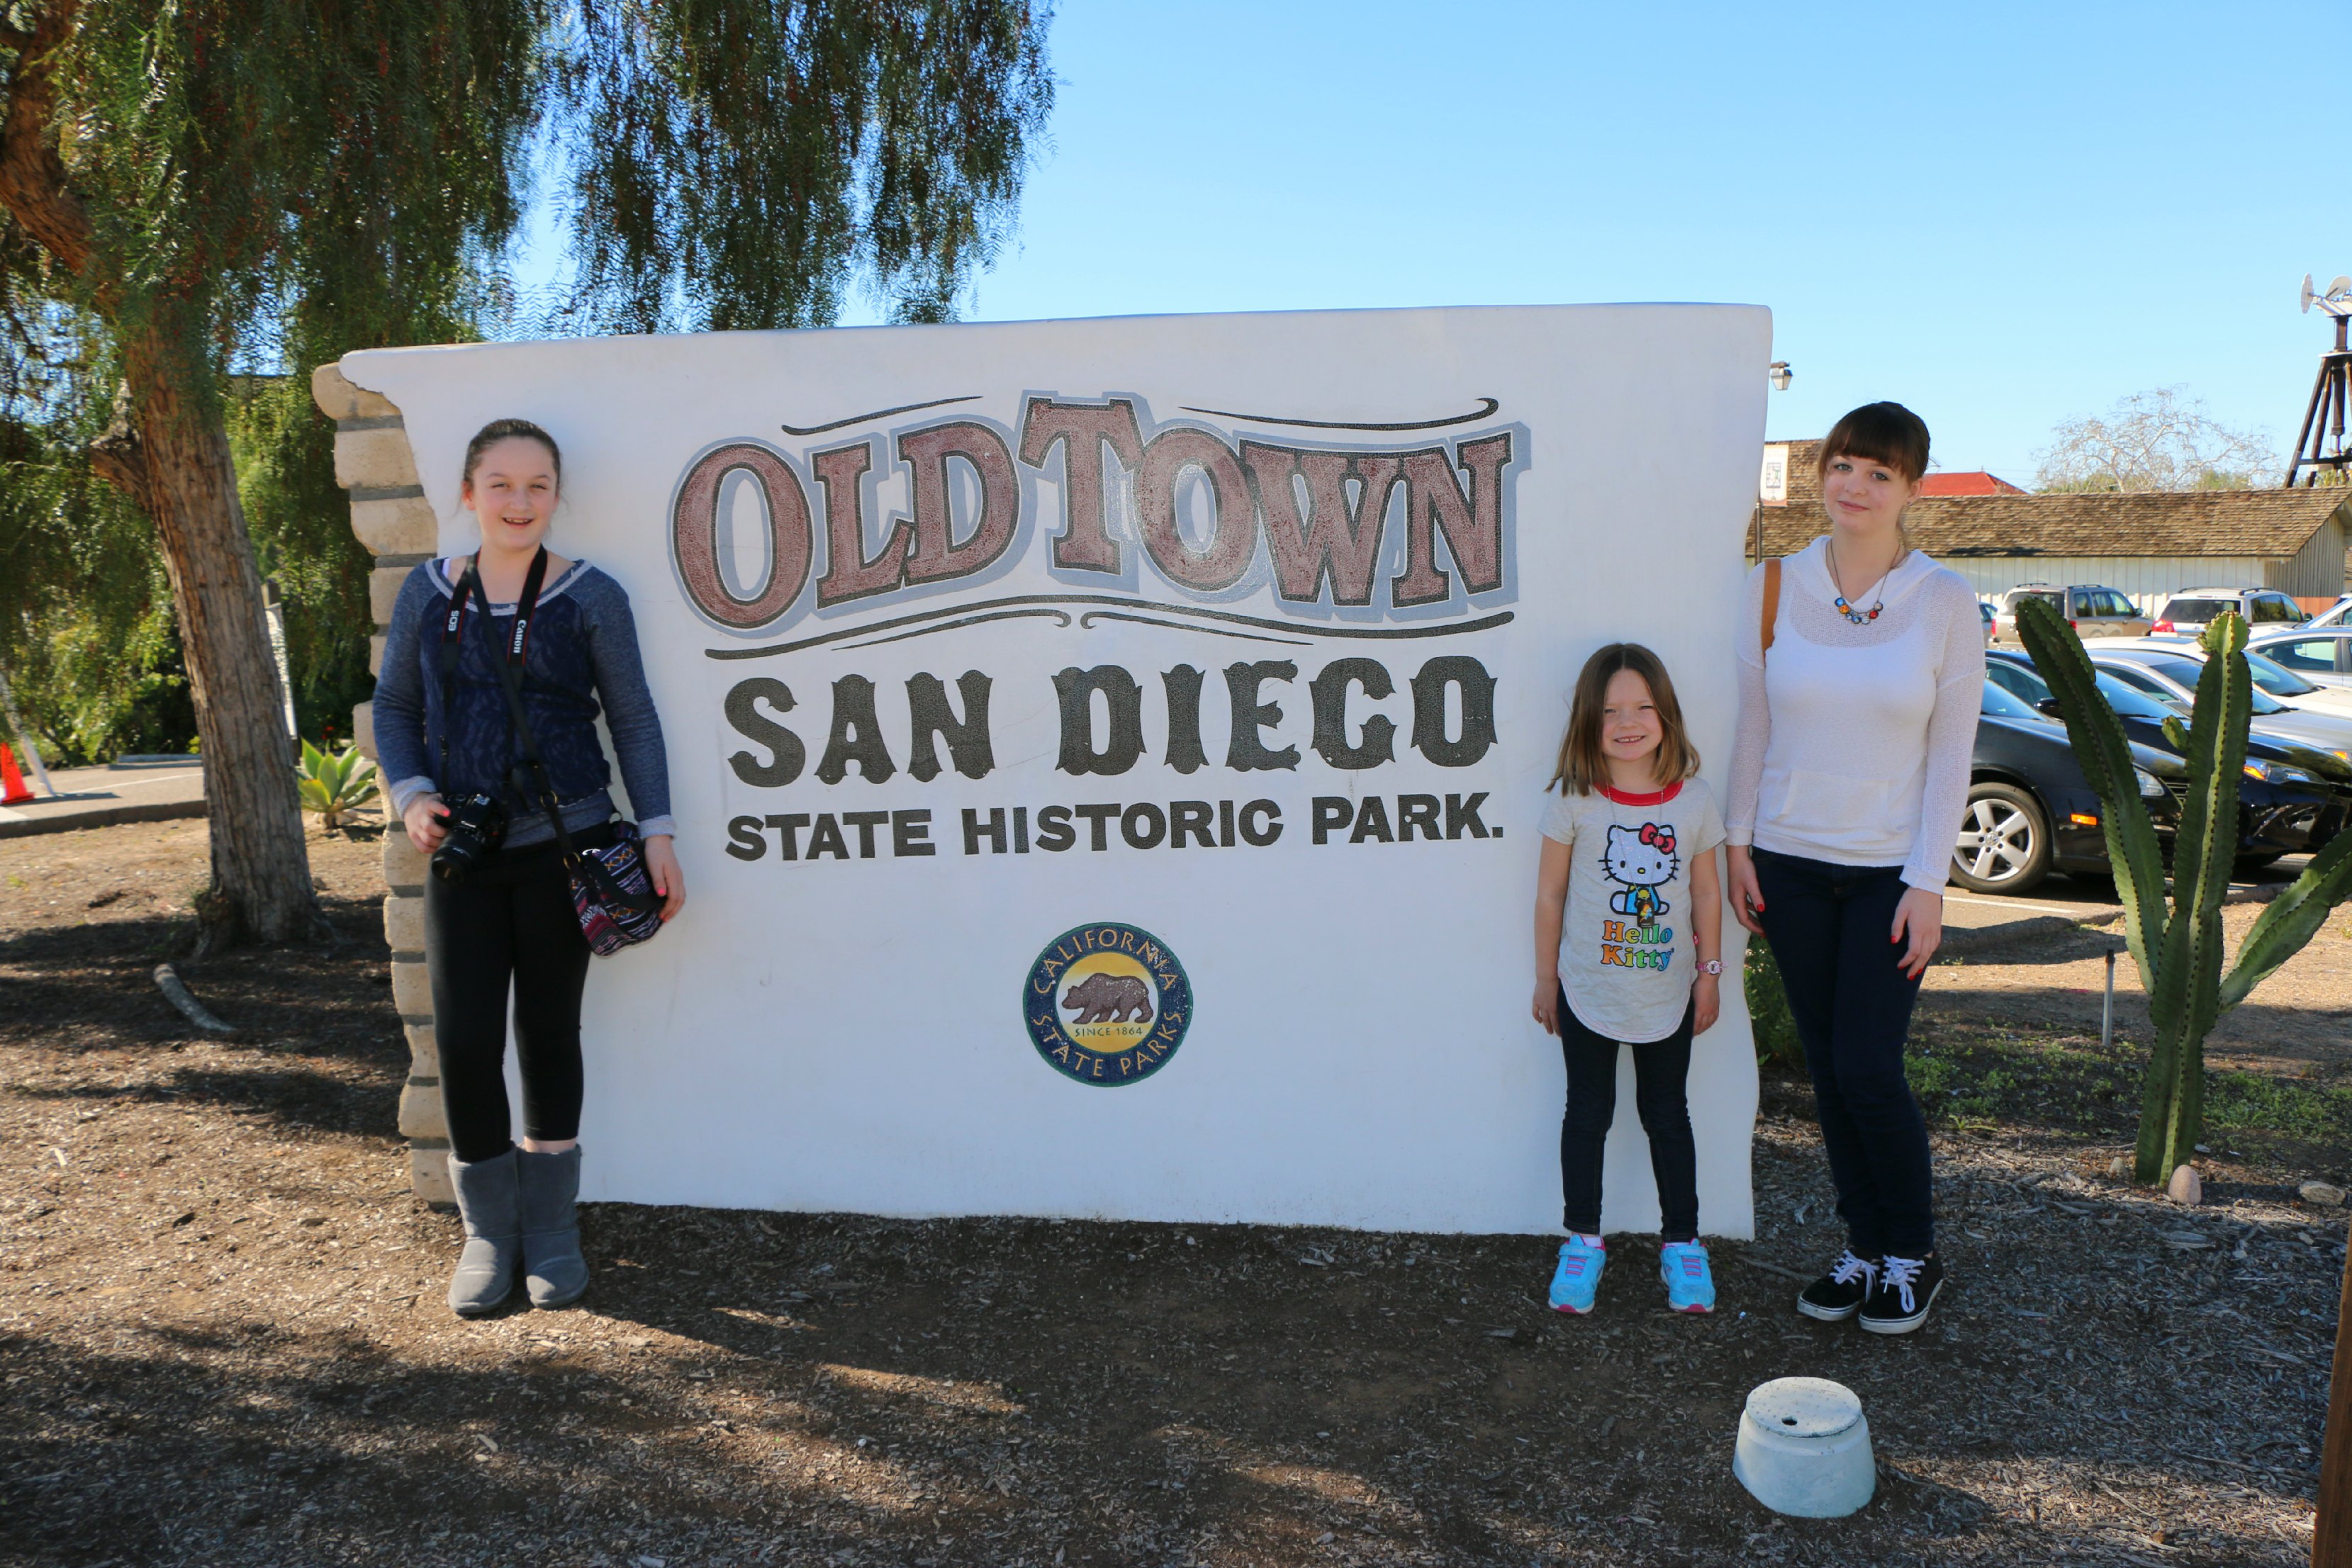 old town san diego